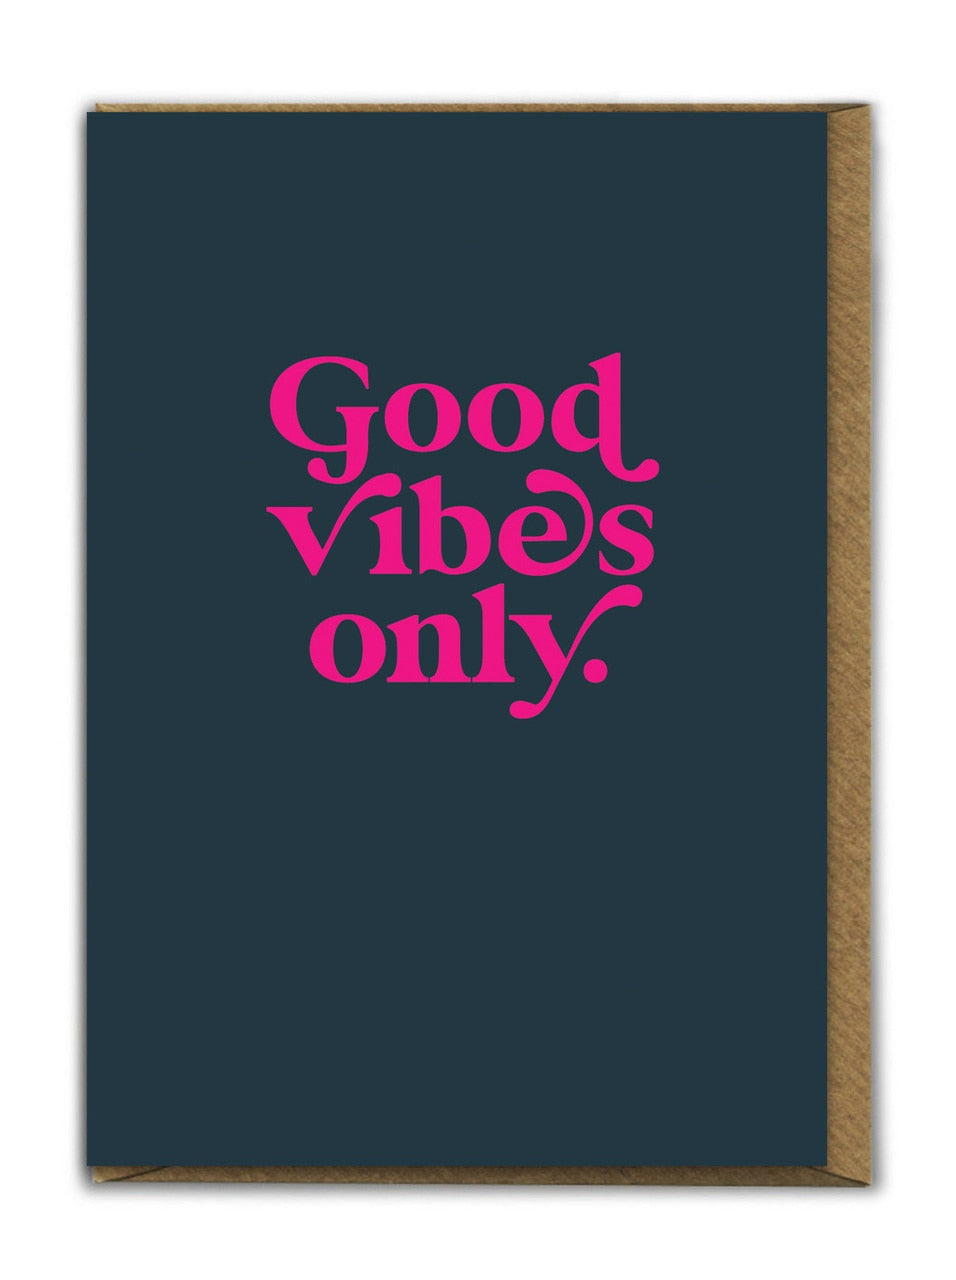 GOOD VIBES ONLY greeting card